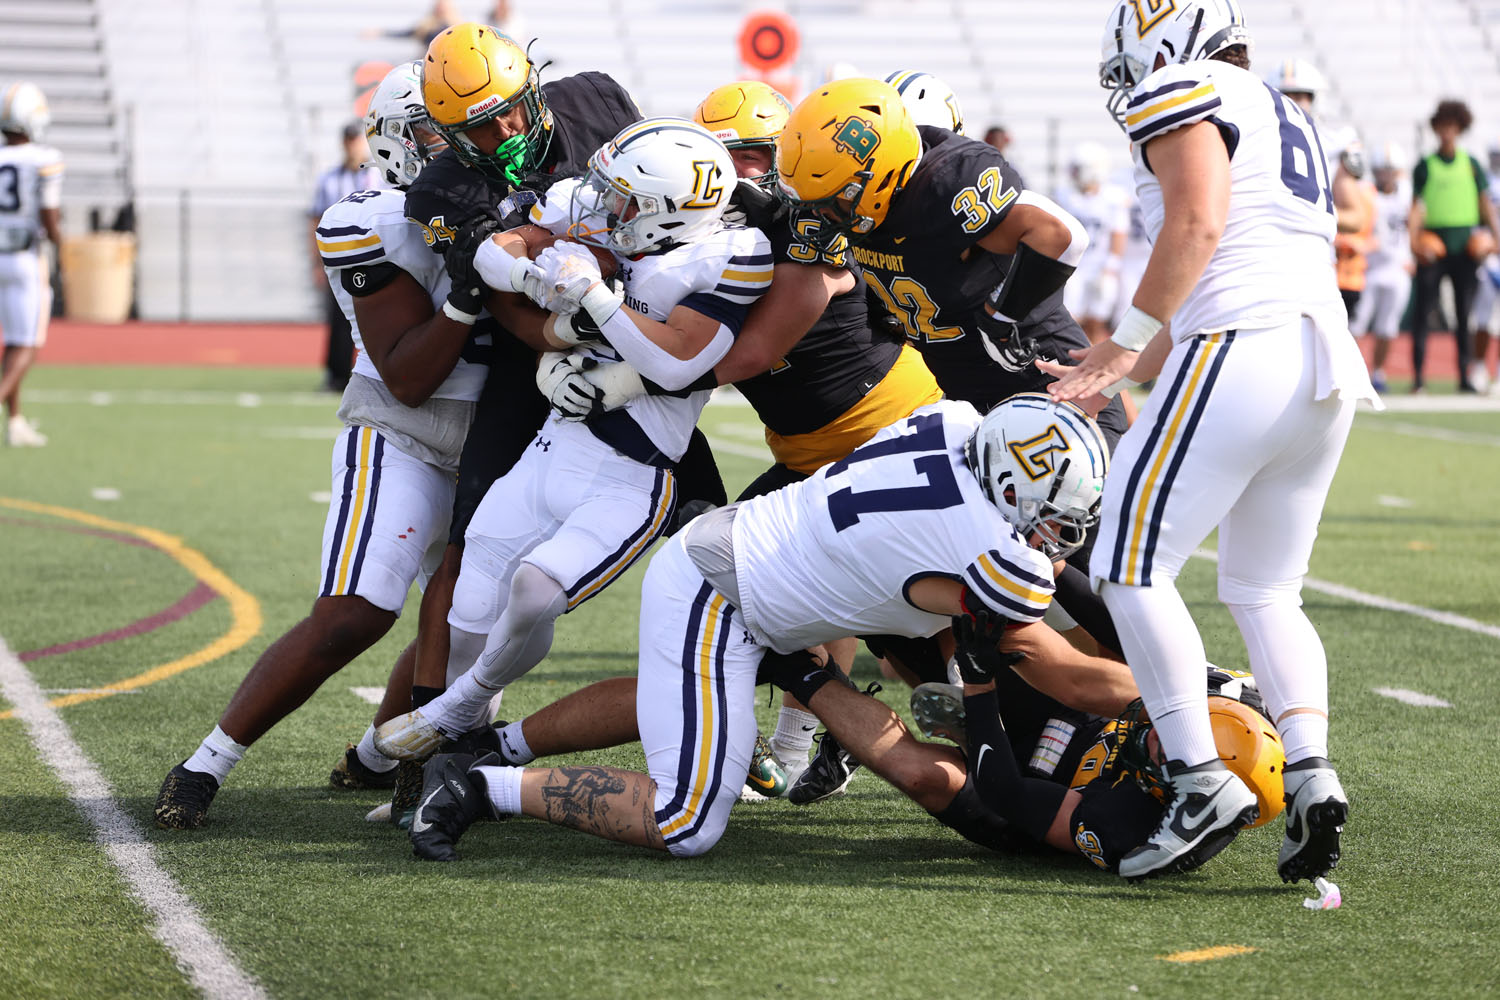 Brockport defense pushing the ball carrier back